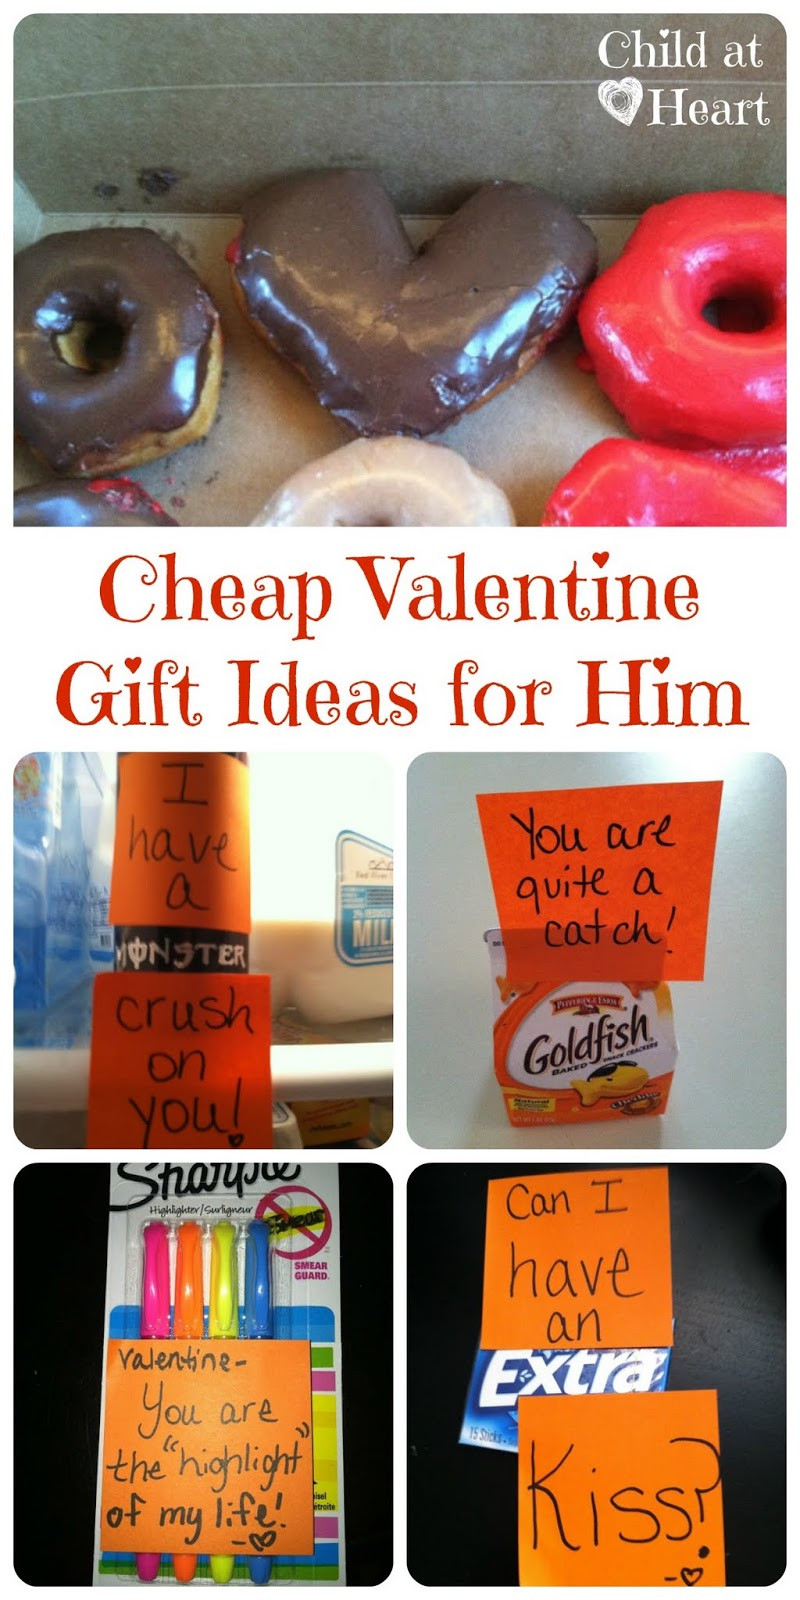 Cheap Valentines Day Gifts
 Cheap Valentine Gift Ideas for Him Child at Heart Blog